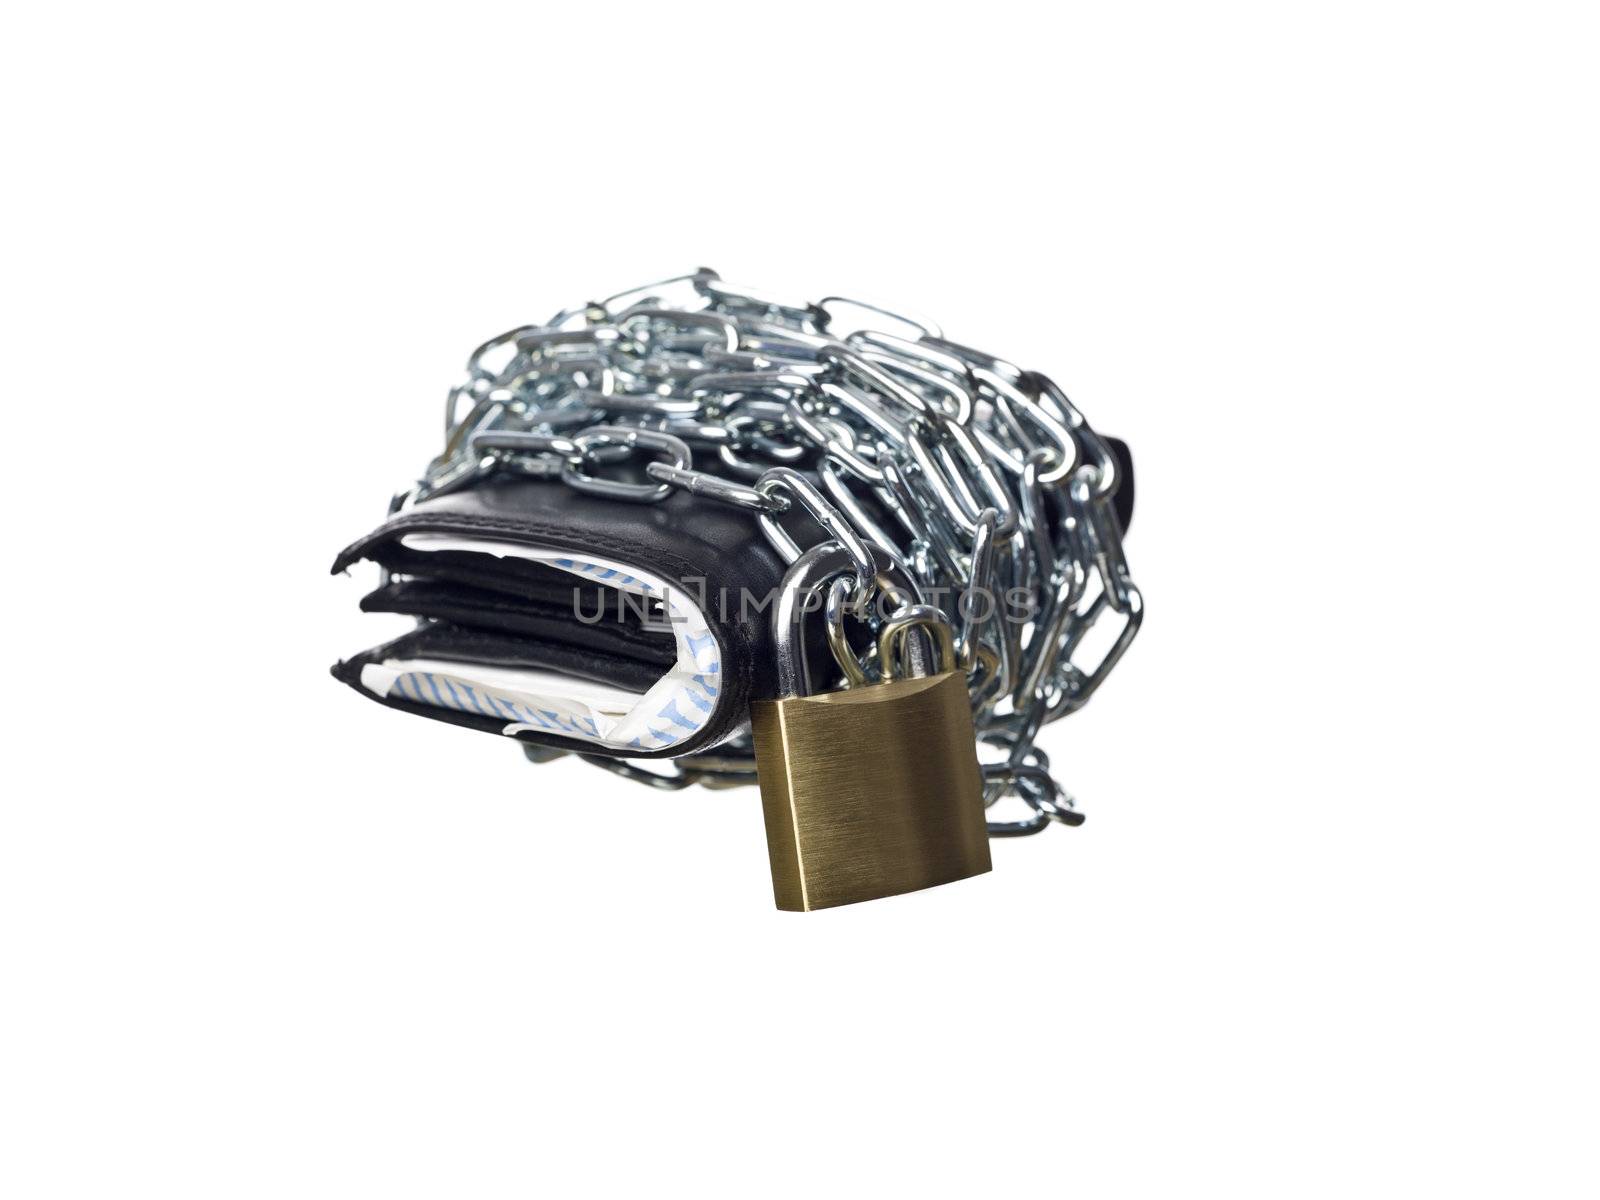 Wallet wrapped in chains with a padlock